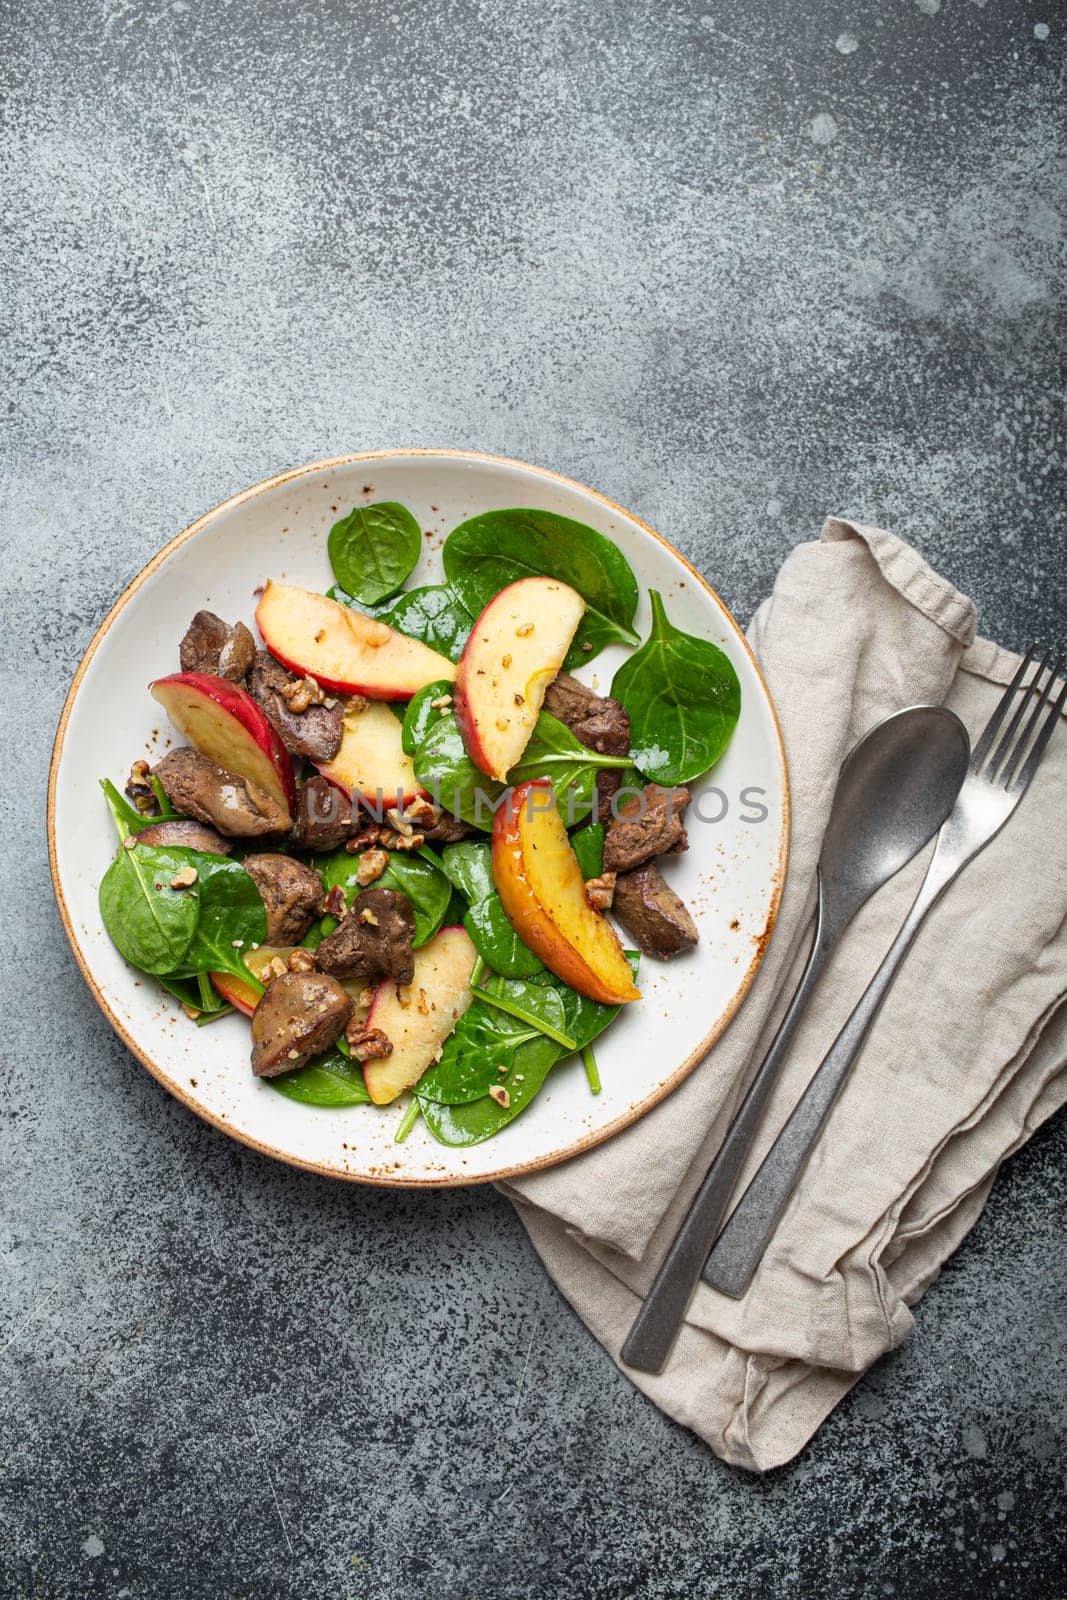 Healthy Salad with Iron Rich Ingredients Chicken Liver, Apples, Fresh Spinach and Walnuts on White Ceramic Plate, Grey Rustic Stone Background Top View.